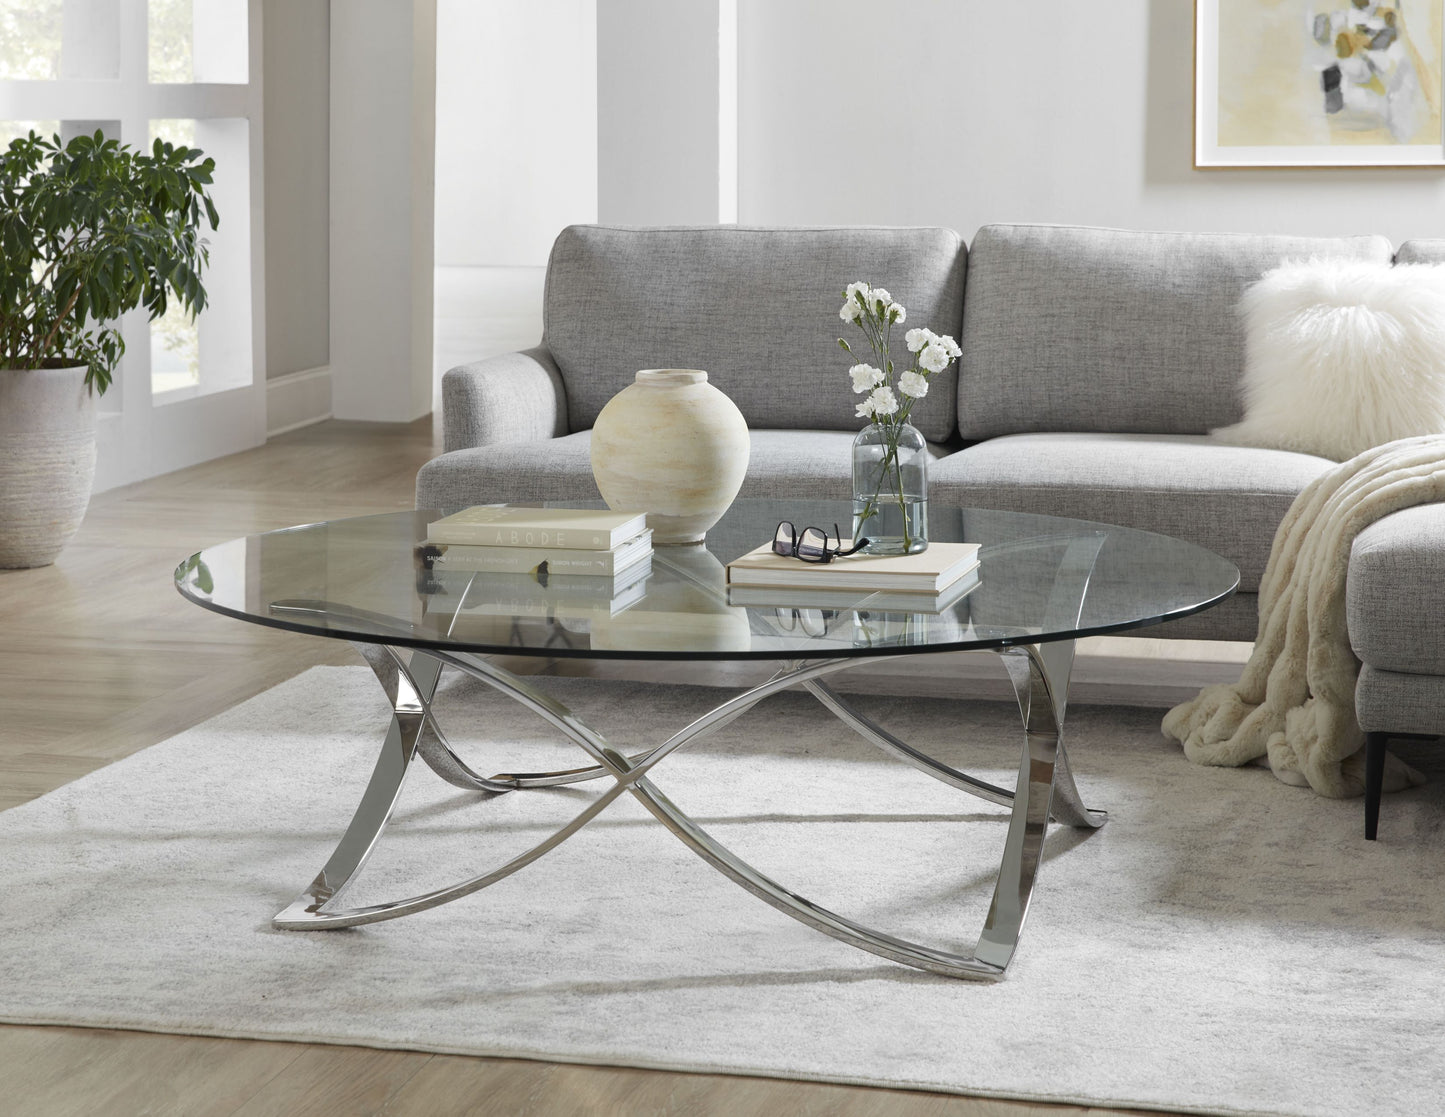 Diana round coffee table